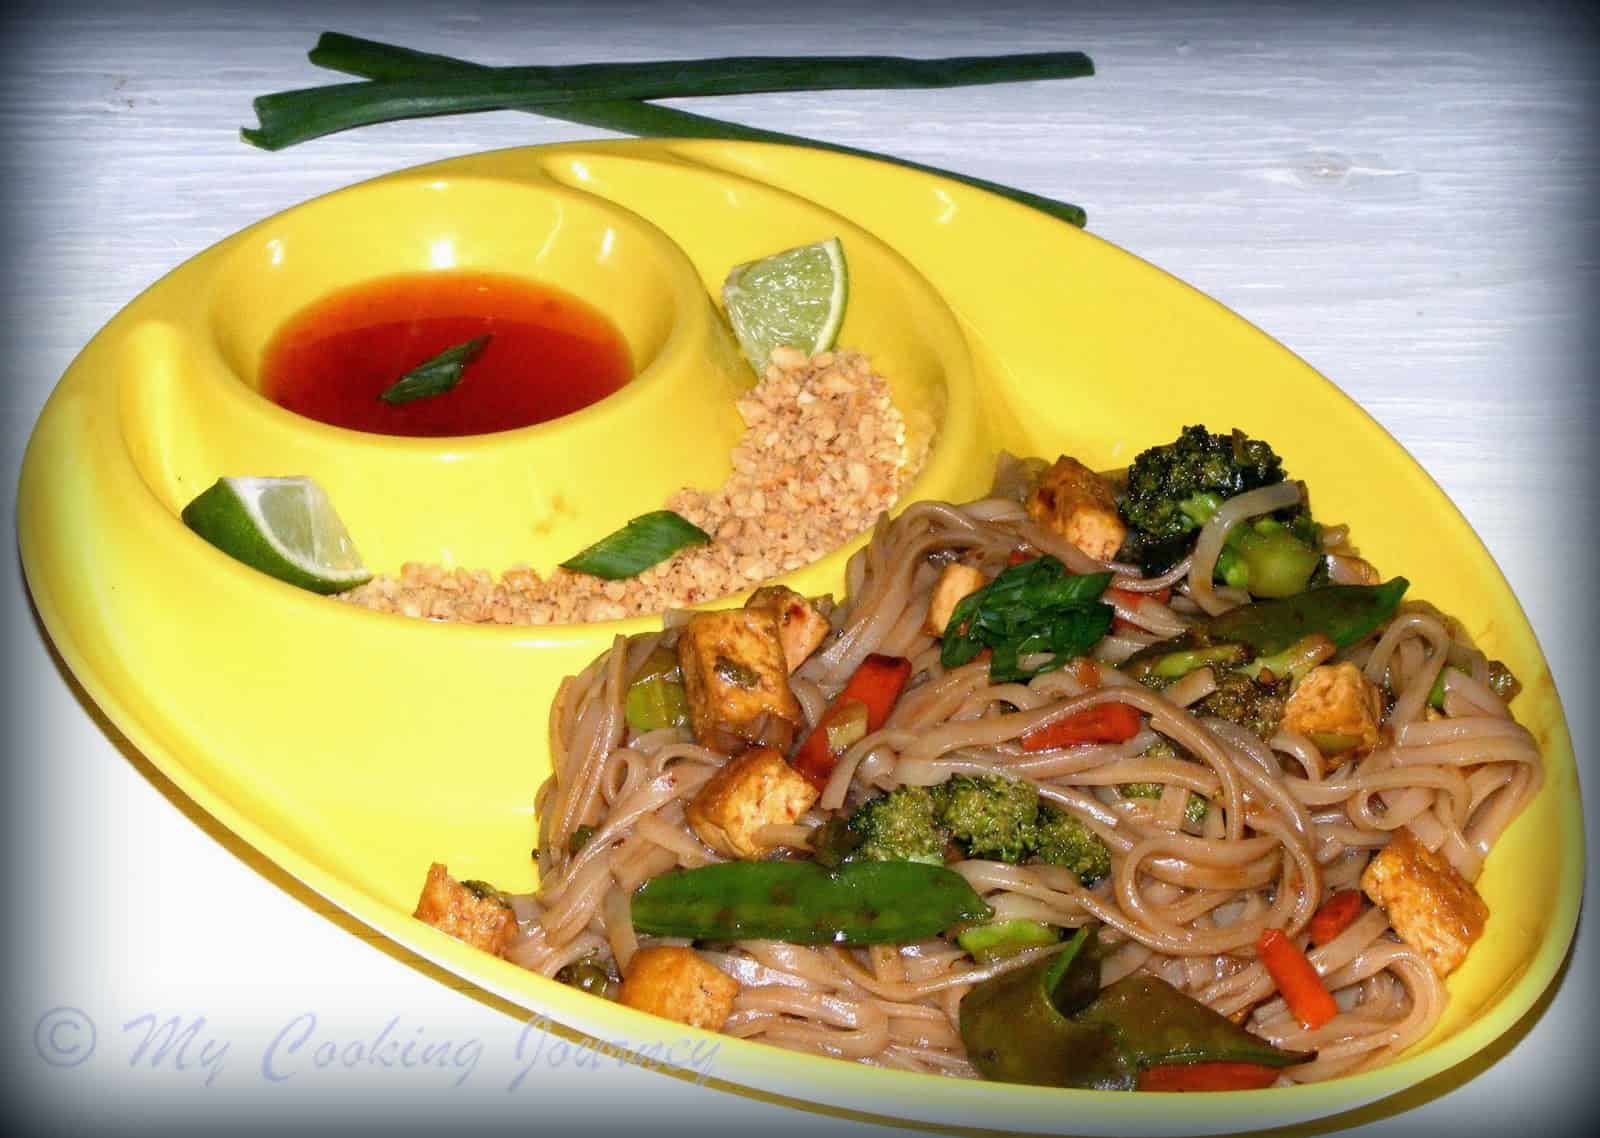 noodles with vegetables in a yellow plate